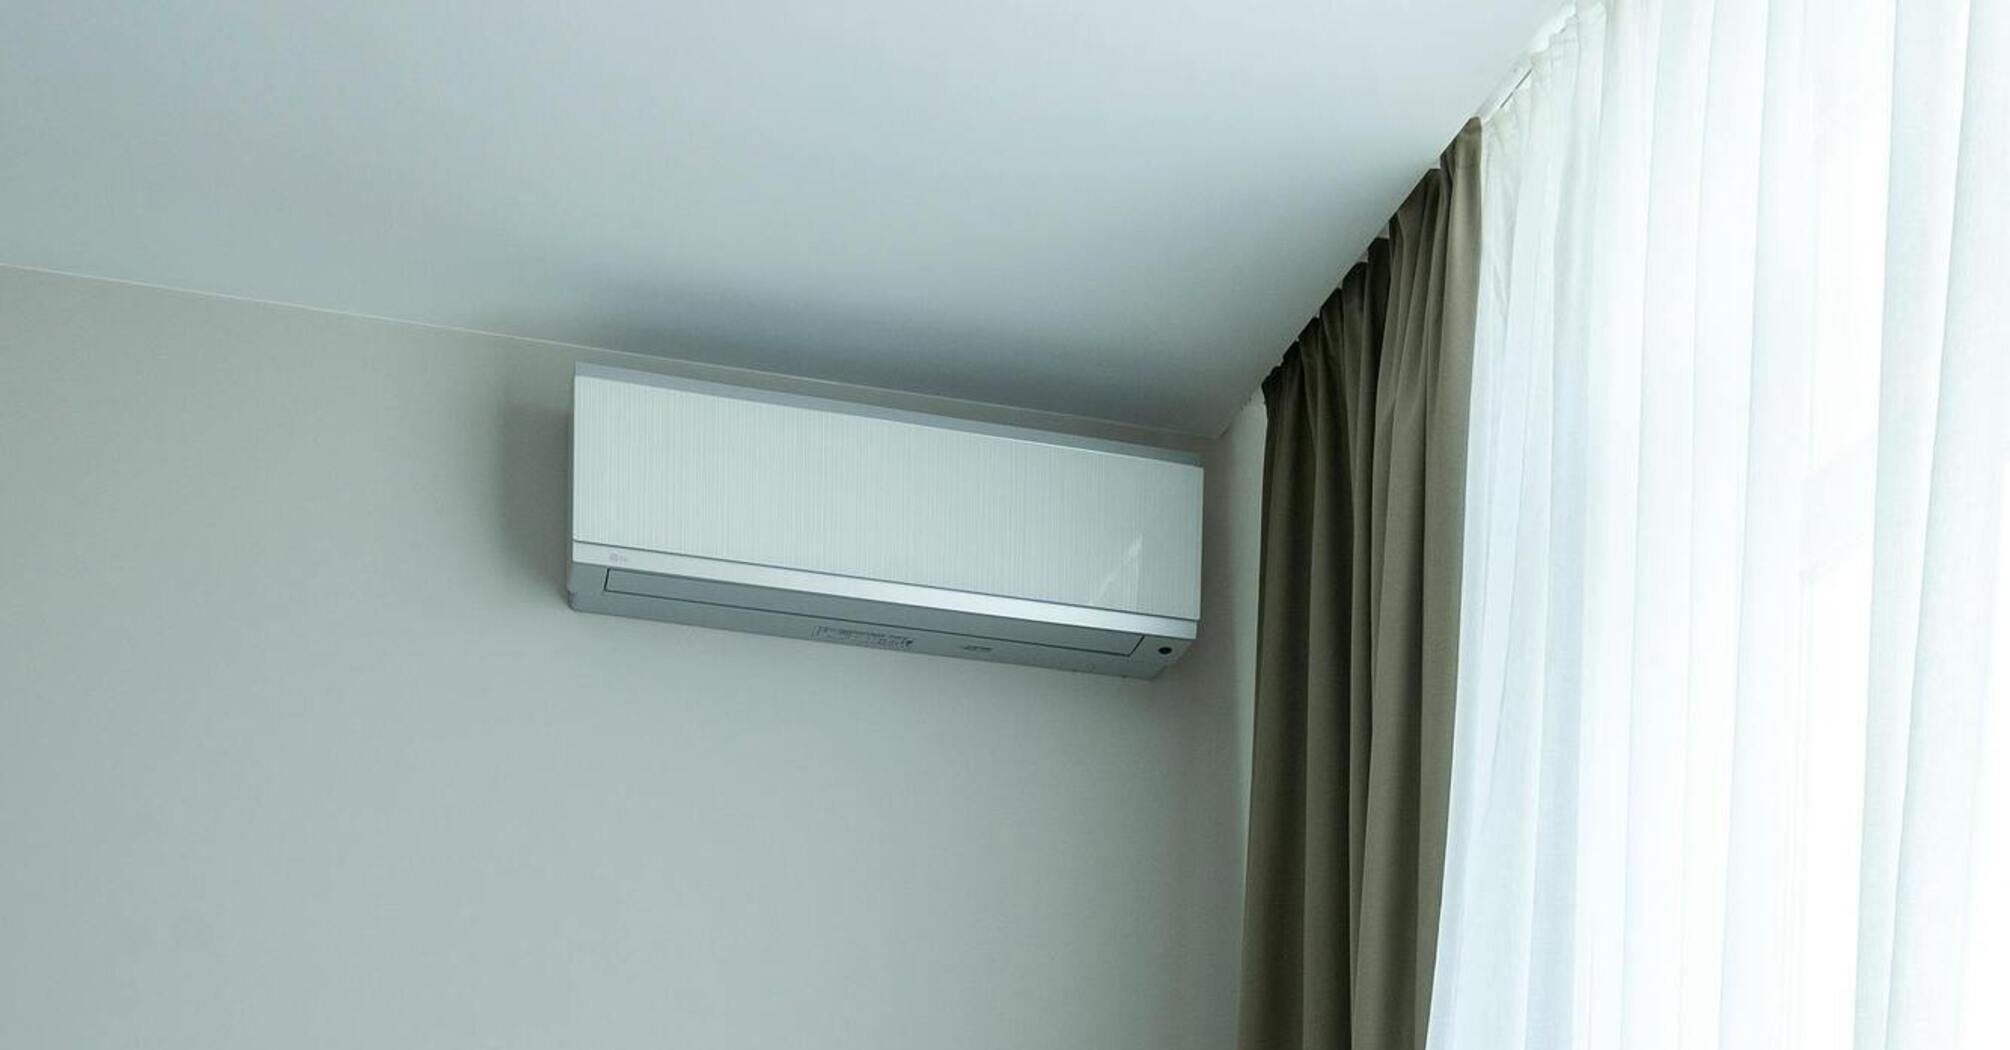 10 ways to save energy and money with an air conditioner